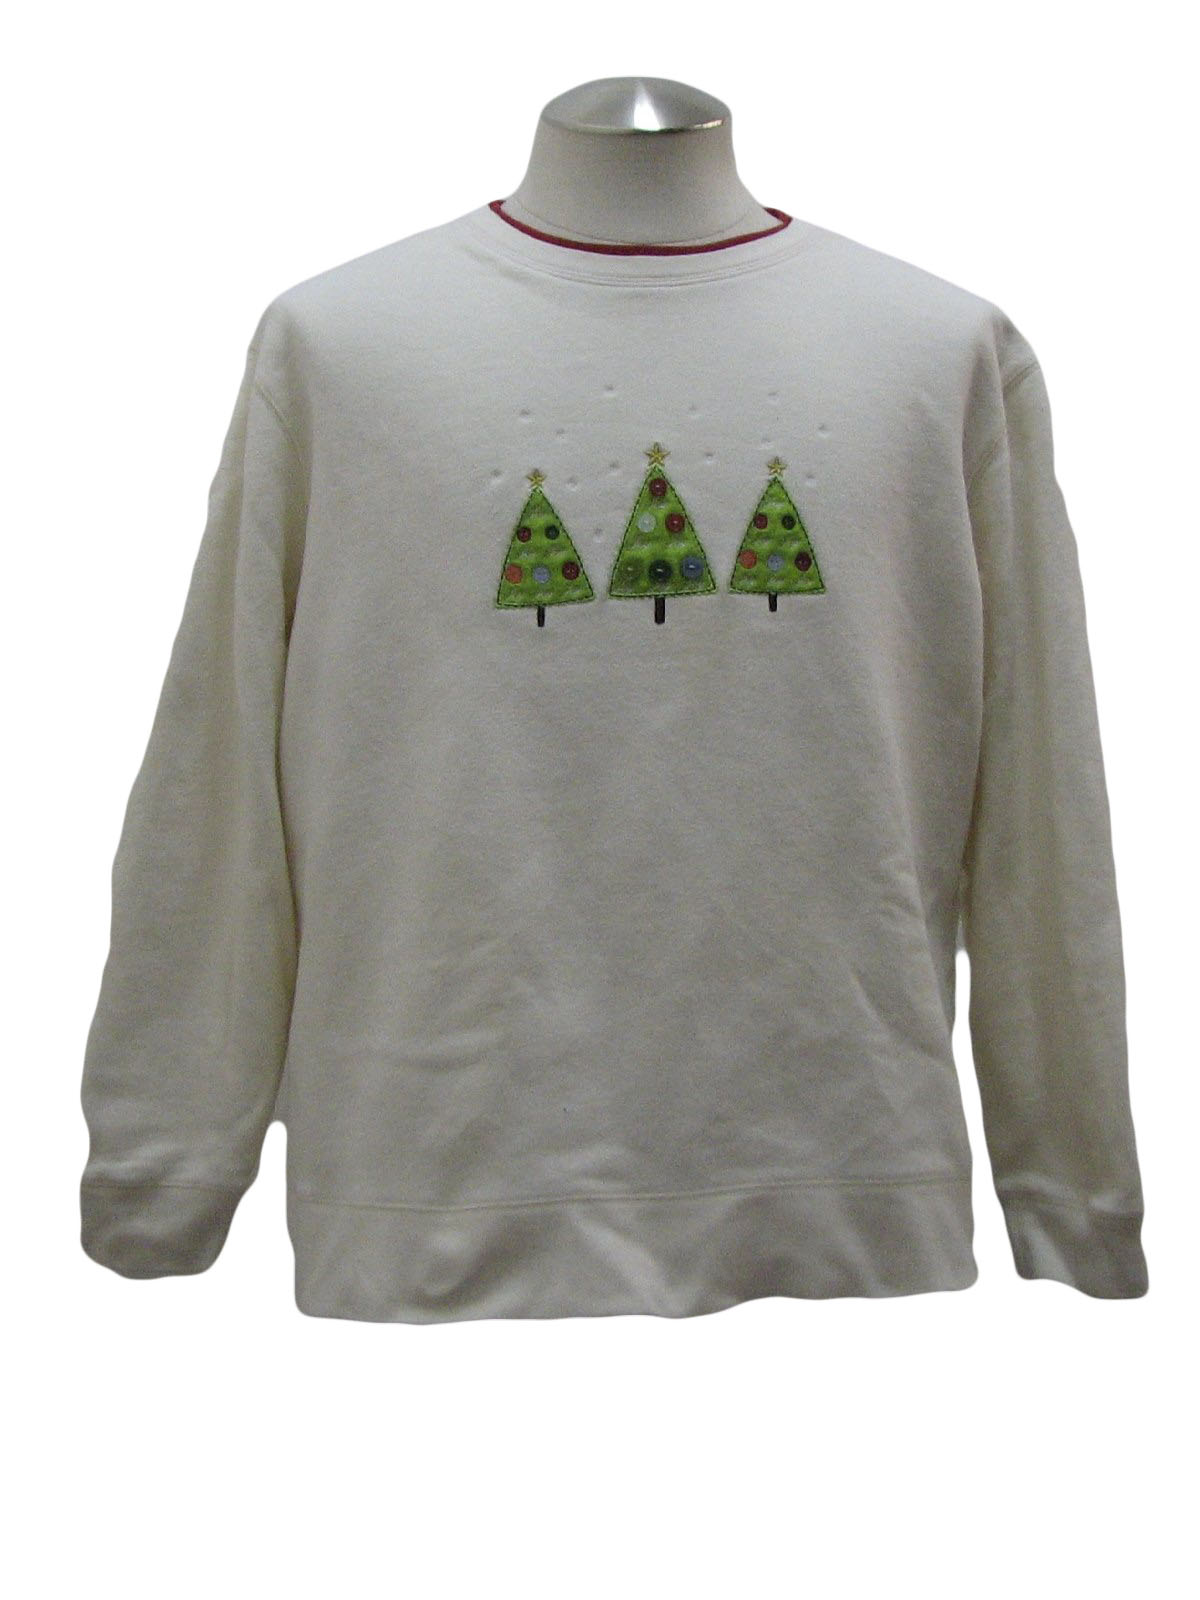 Ugly Christmas Sweatshirt Classic Elements Unisex White Red Green